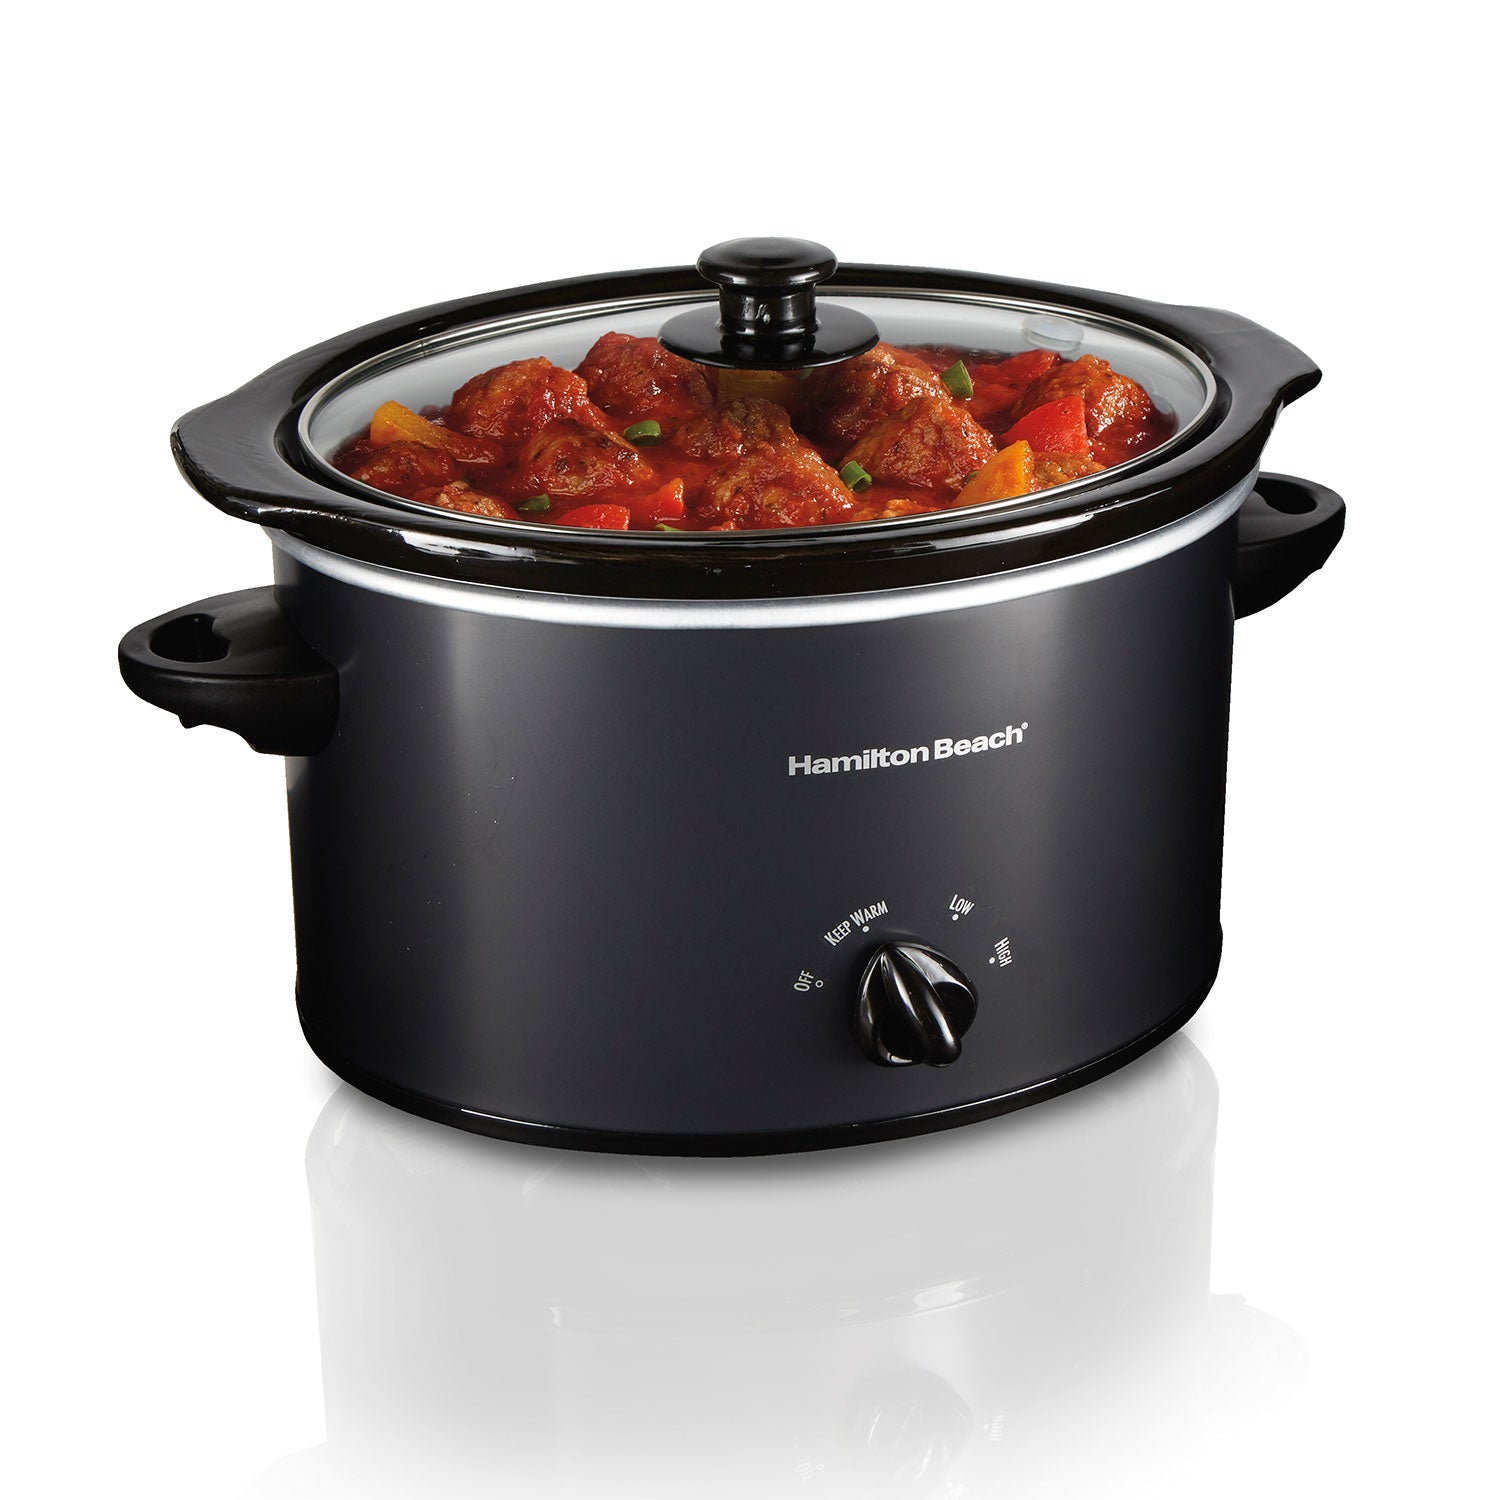 Hamilton Beach 5-Quart Silver/Black Oval Slow Cooker in the Slow